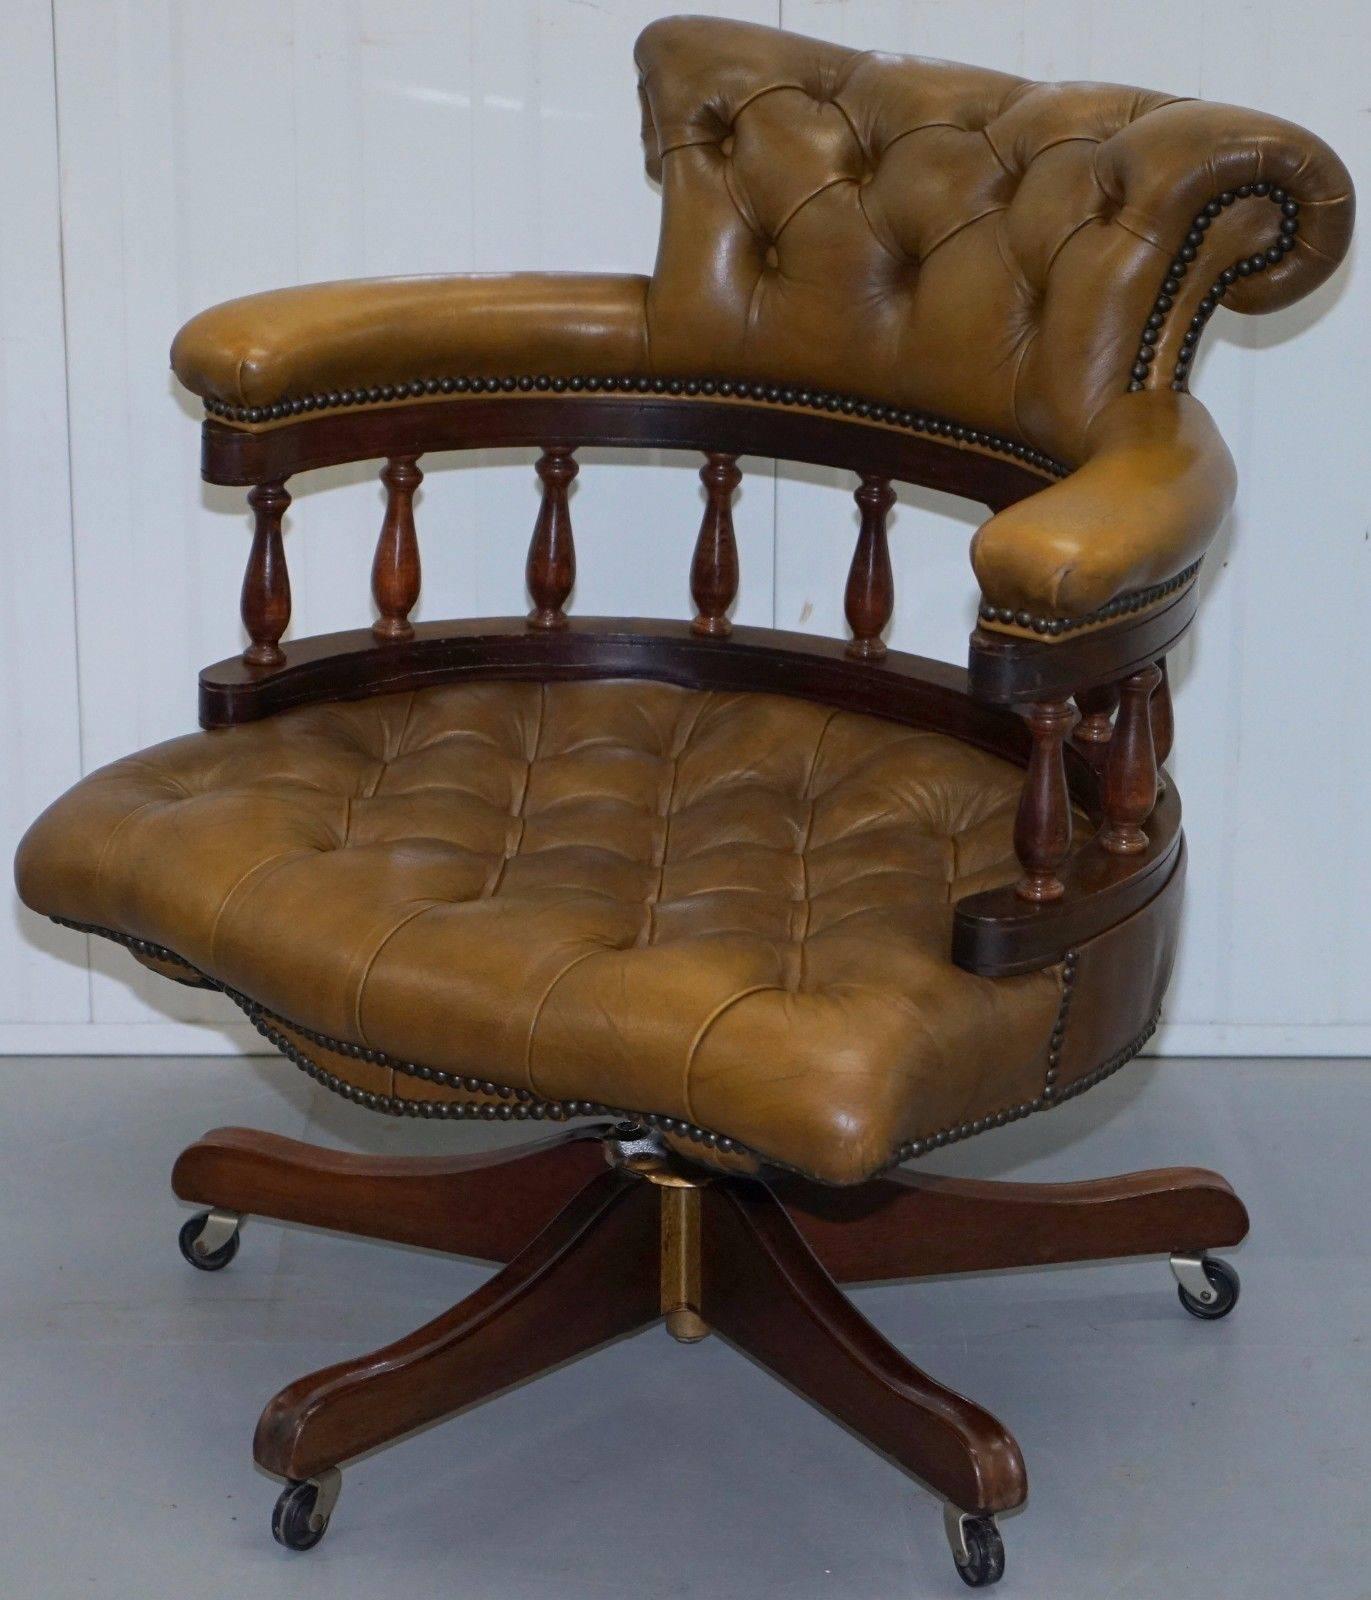 We are delighted to offer for sale this very rare and original custom-made to order 40-year-old Chesterfield captains office chair

This is nothing like the modern day pieces, it’s totally custom handmade in England with a very solid oak frame,